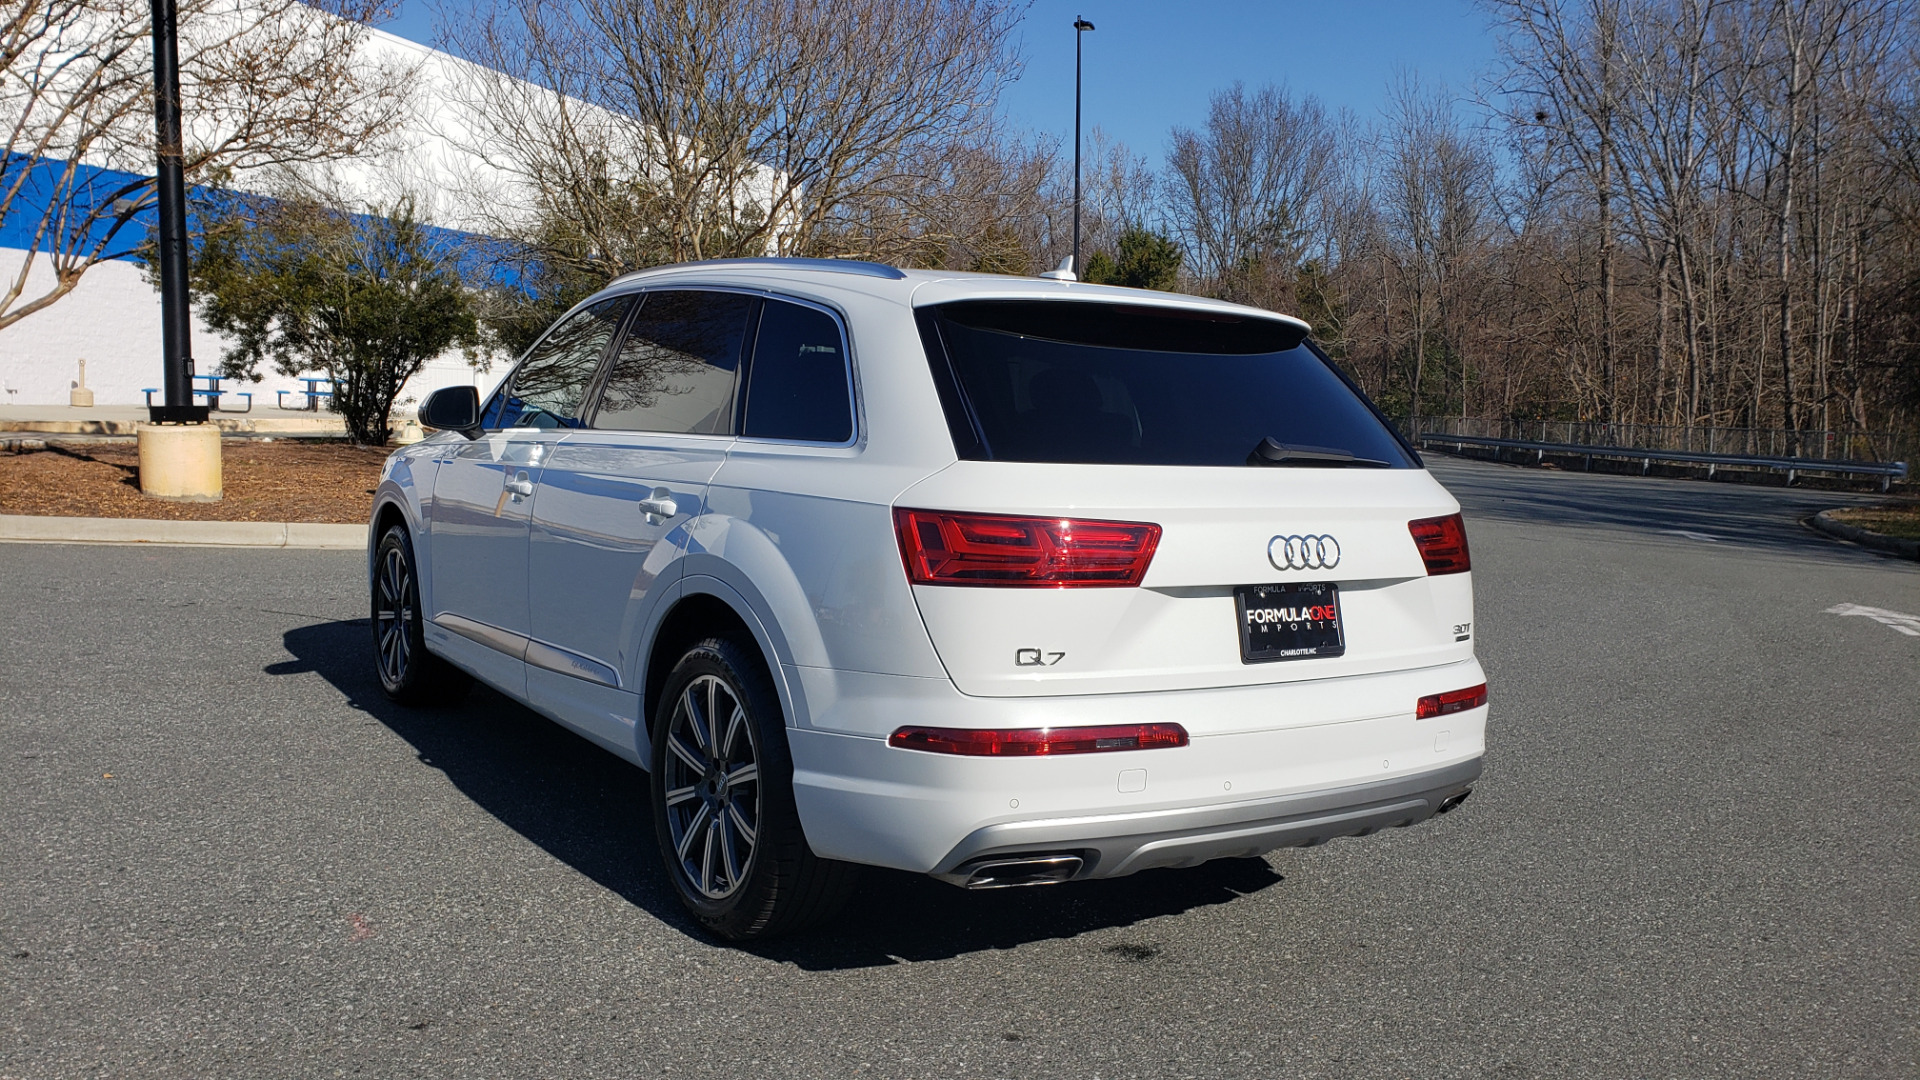 Used 2017 Audi Q7 PRESTIGE 3.0T / NAV / CLD WTHR / SUNROOF / REARVIEW for sale Sold at Formula Imports in Charlotte NC 28227 3